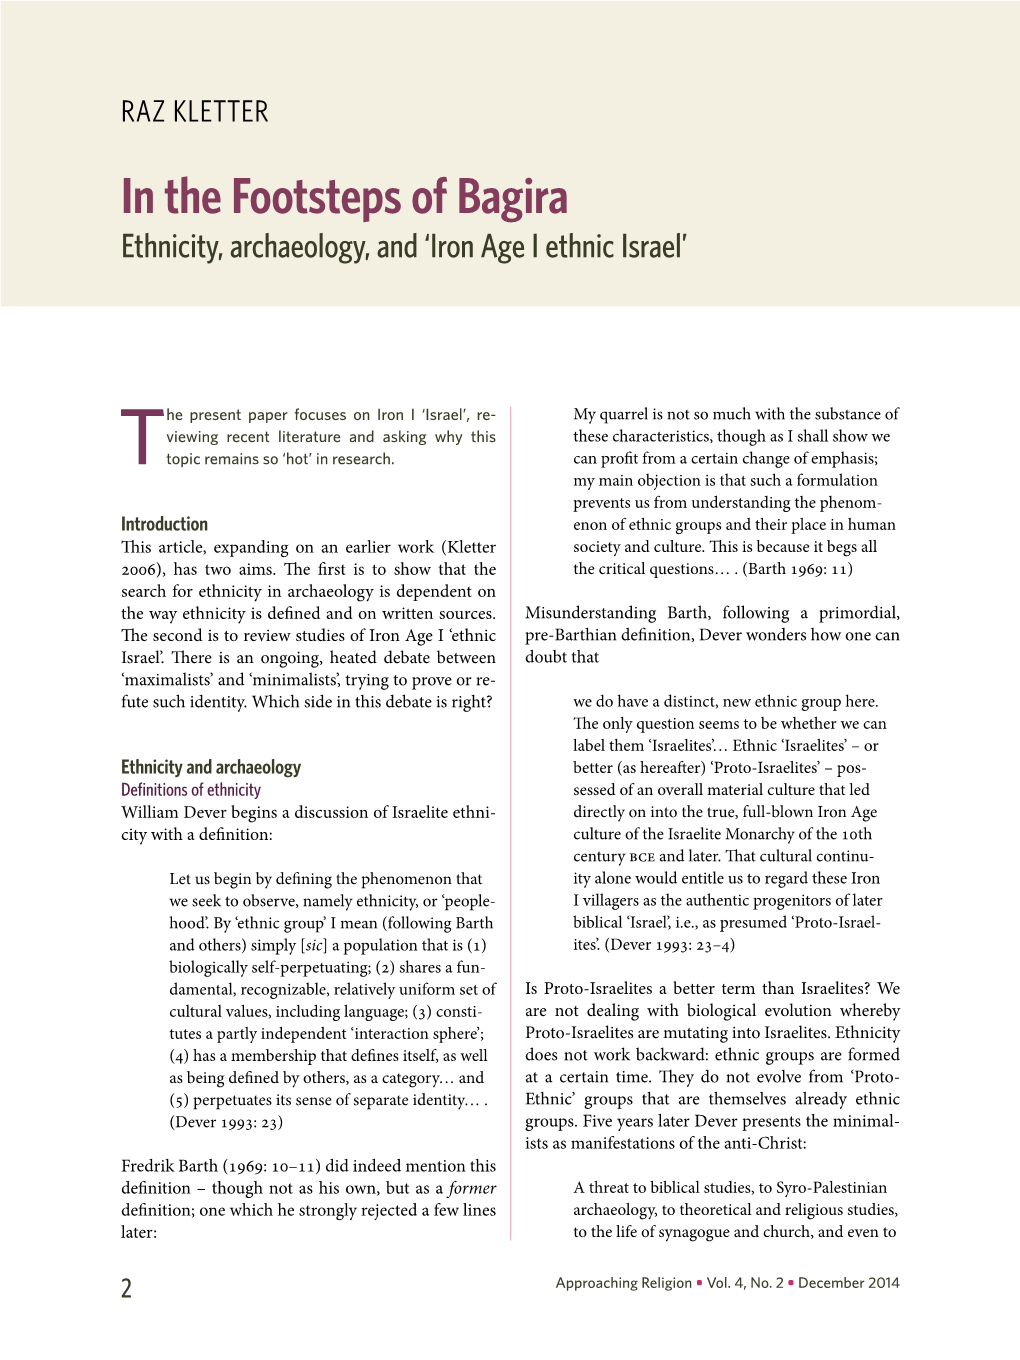 In the Footsteps of Bagira Ethnicity, Archaeology, and ‘Iron Age I Ethnic Israel’